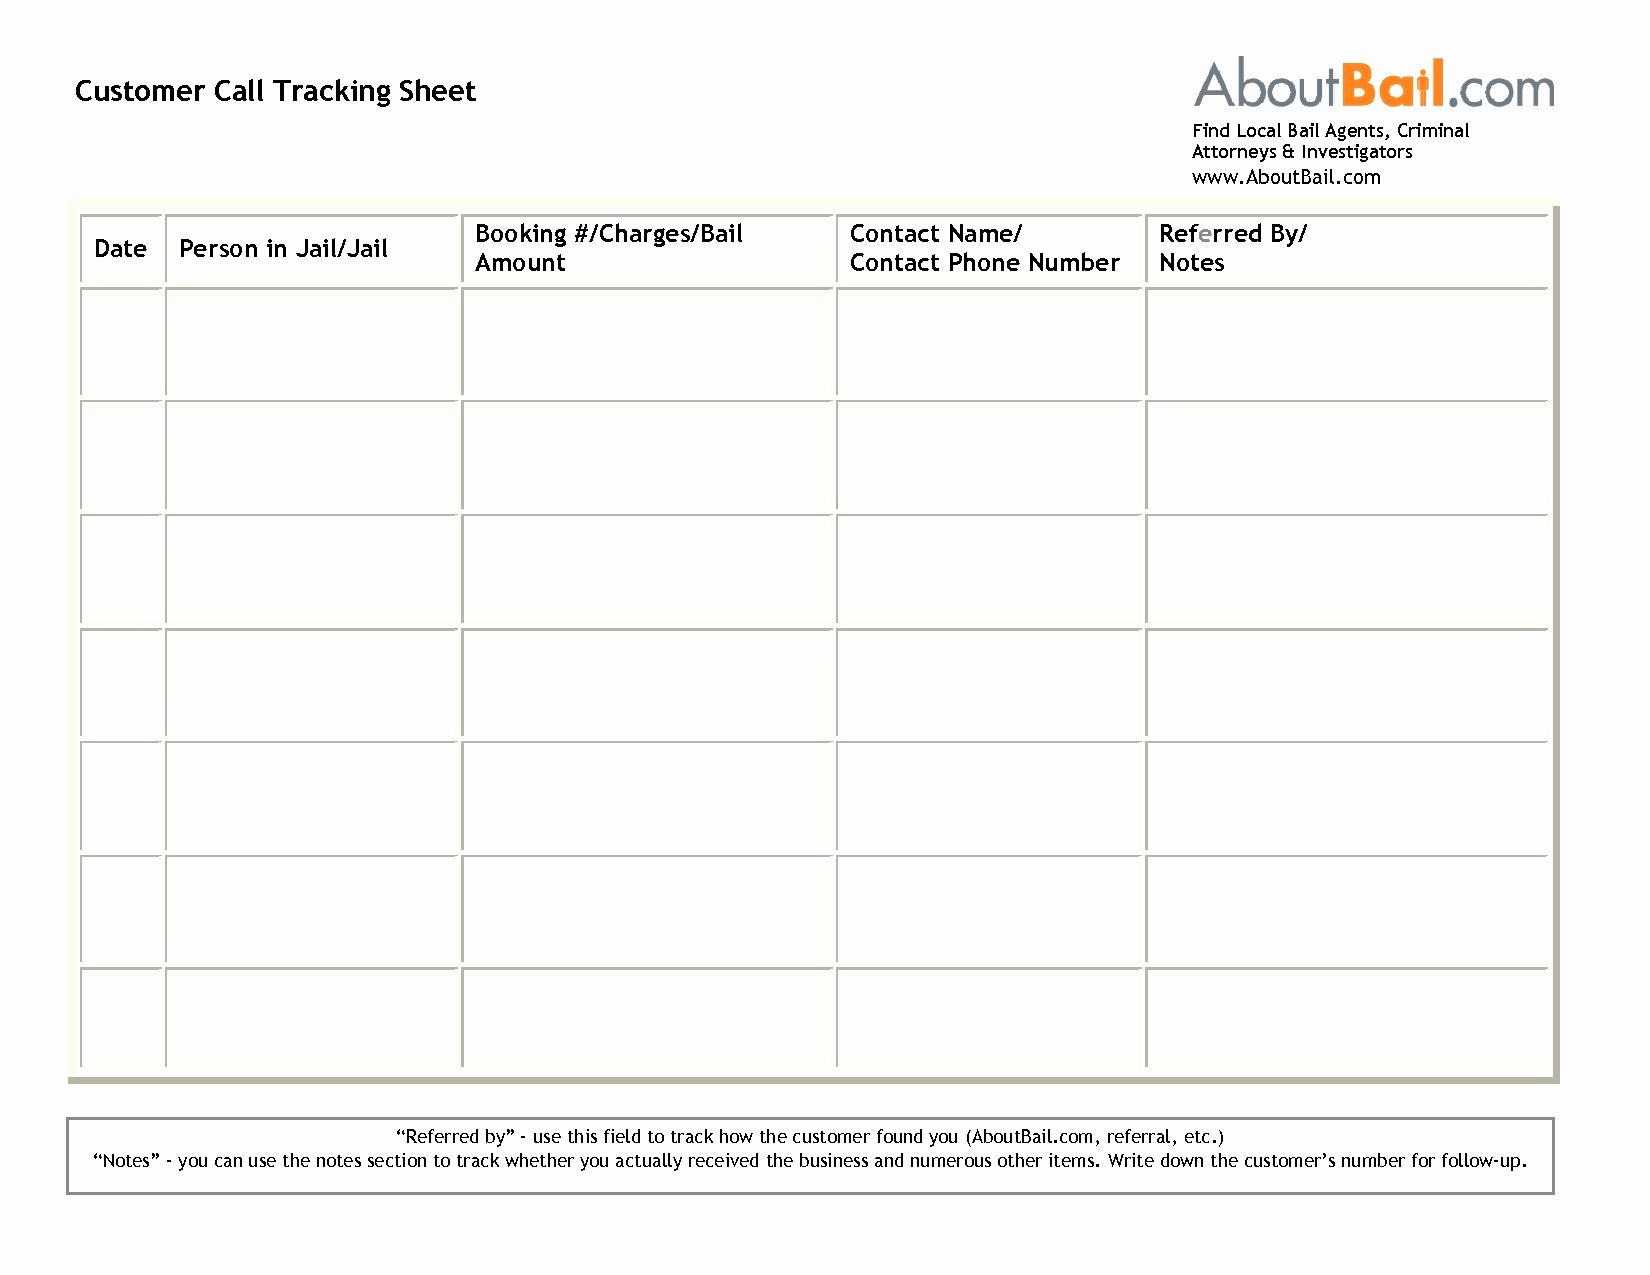 Tracking Sales Calls Spreadsheet Lovely Sales Calls Tracking For Tracking Sales Calls Spreadsheet